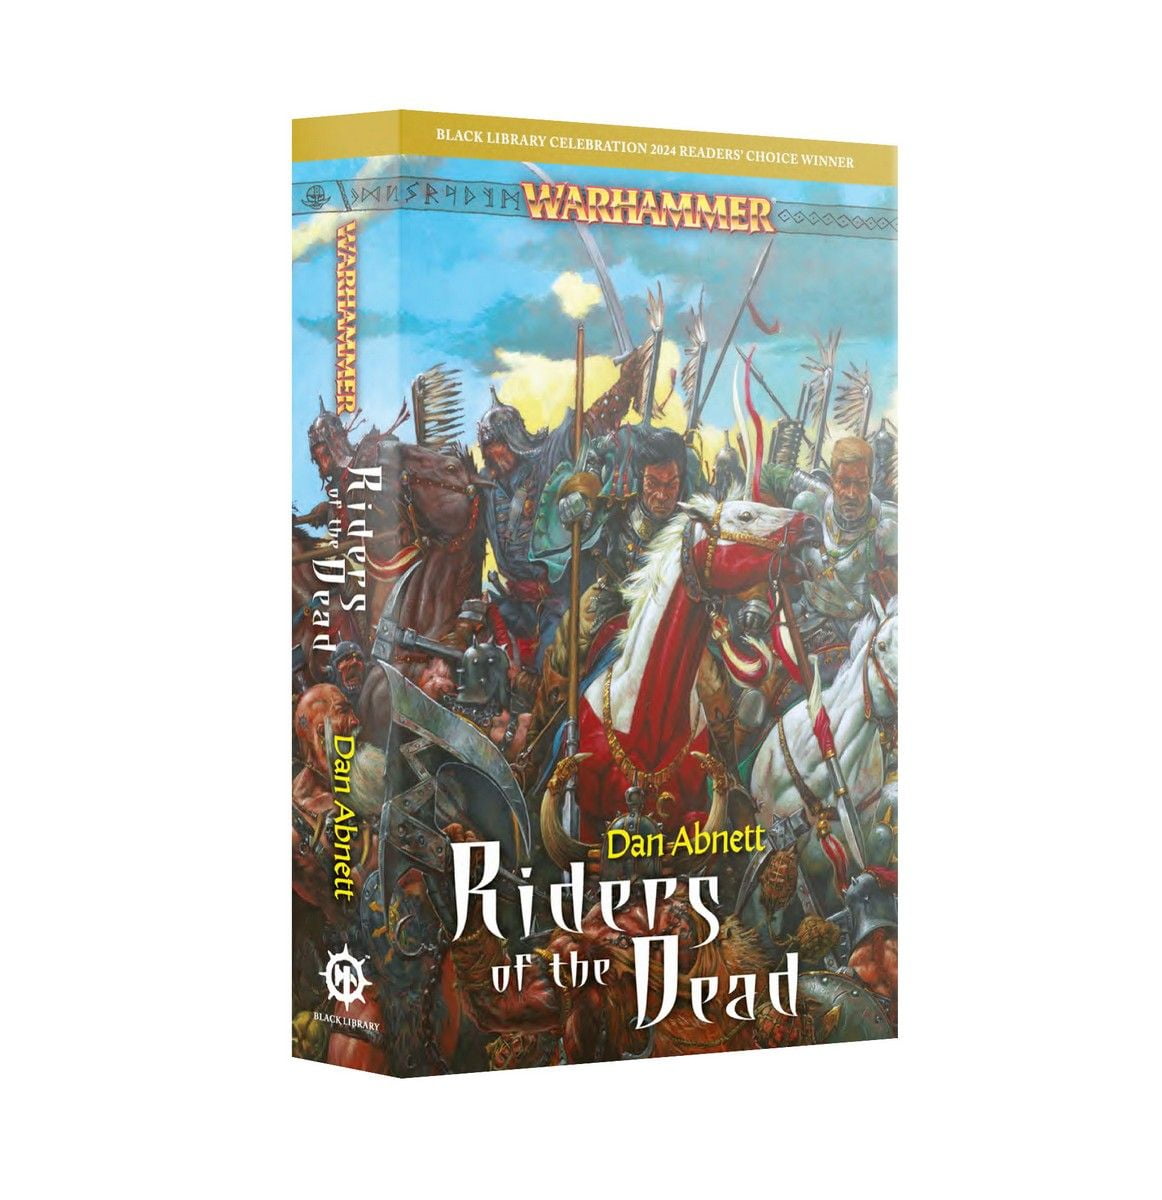 Riders of the Dead Paperback